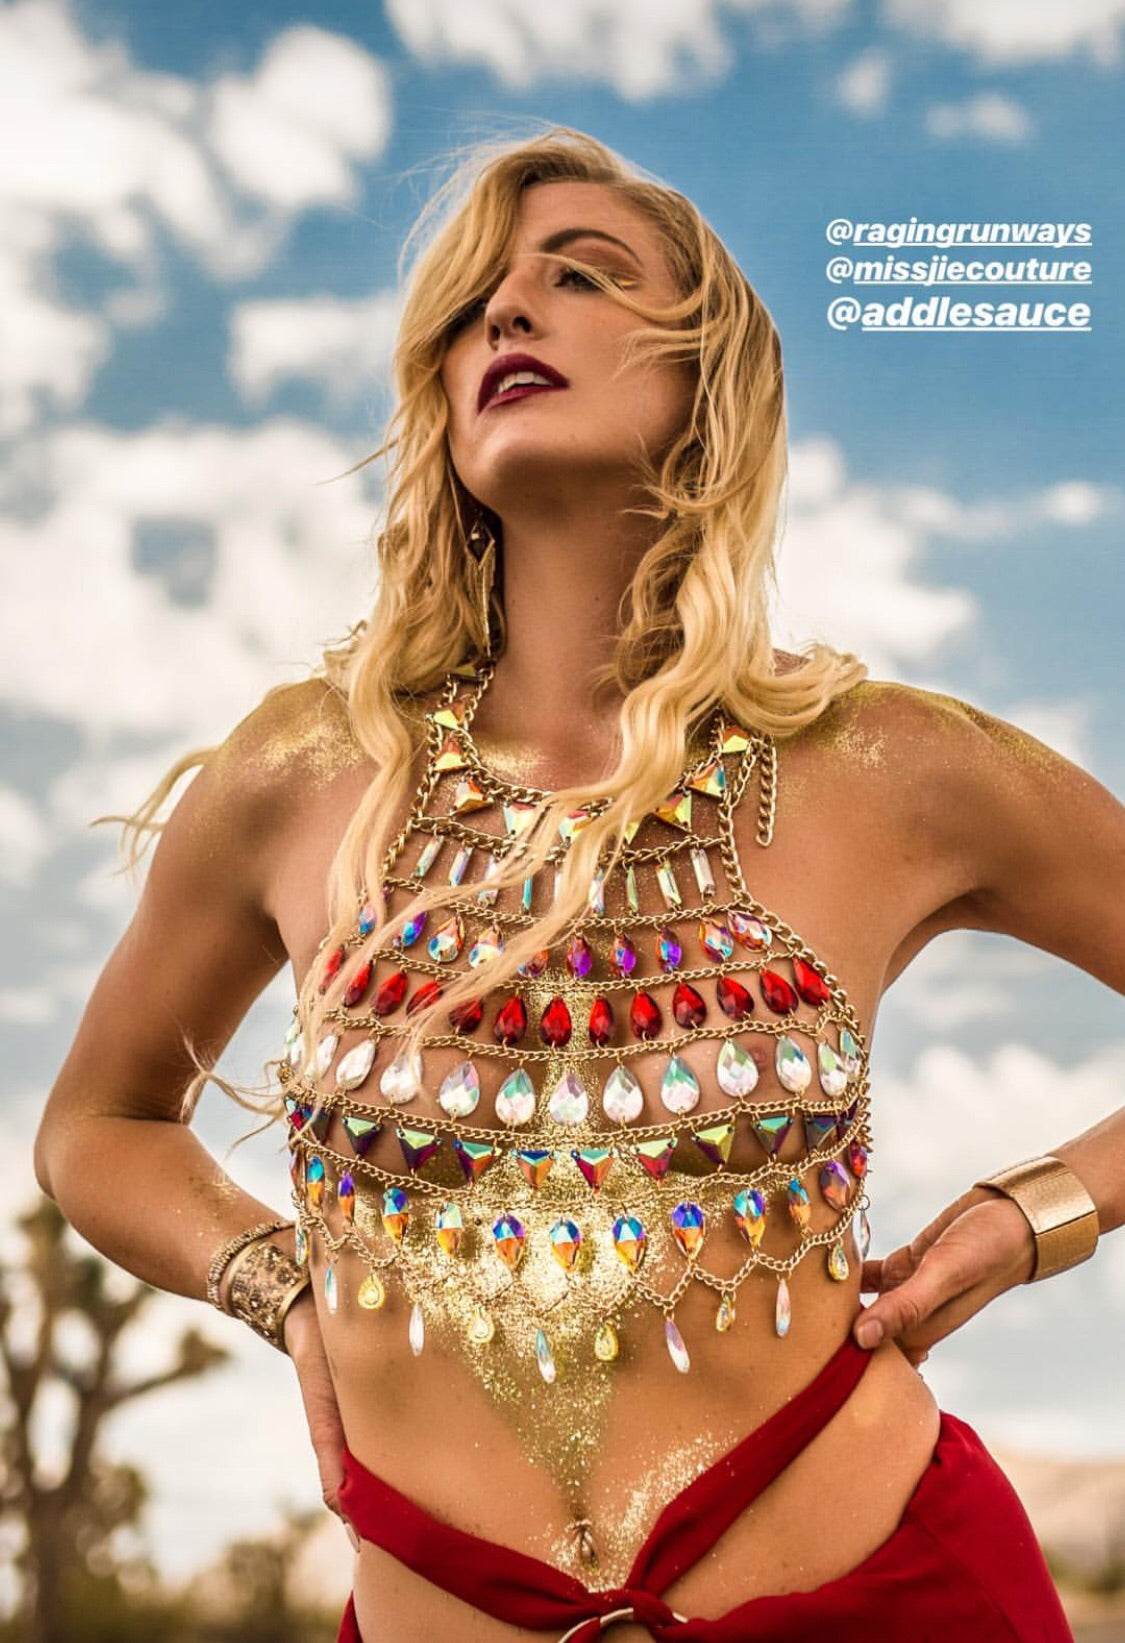 Addles Gold Chain Jewelry Top